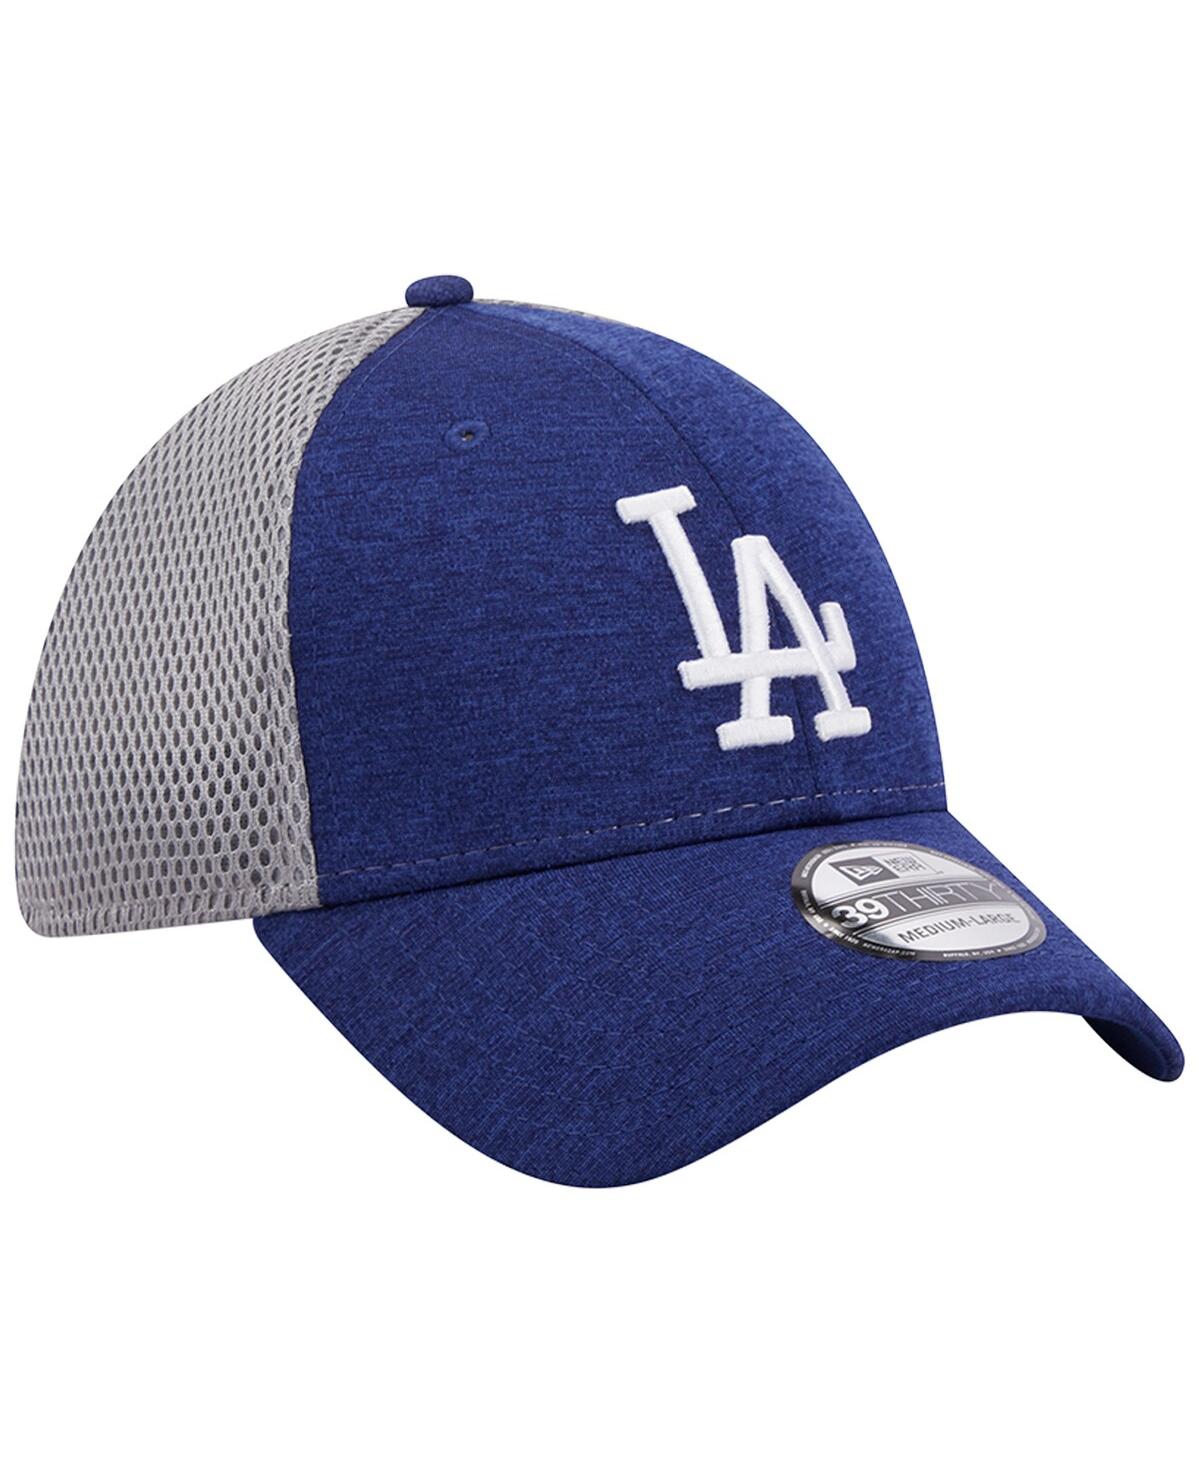 Men's New Era Royal Los Angeles Dodgers Sunlight Pop 59FIFTY Fitted Hat 